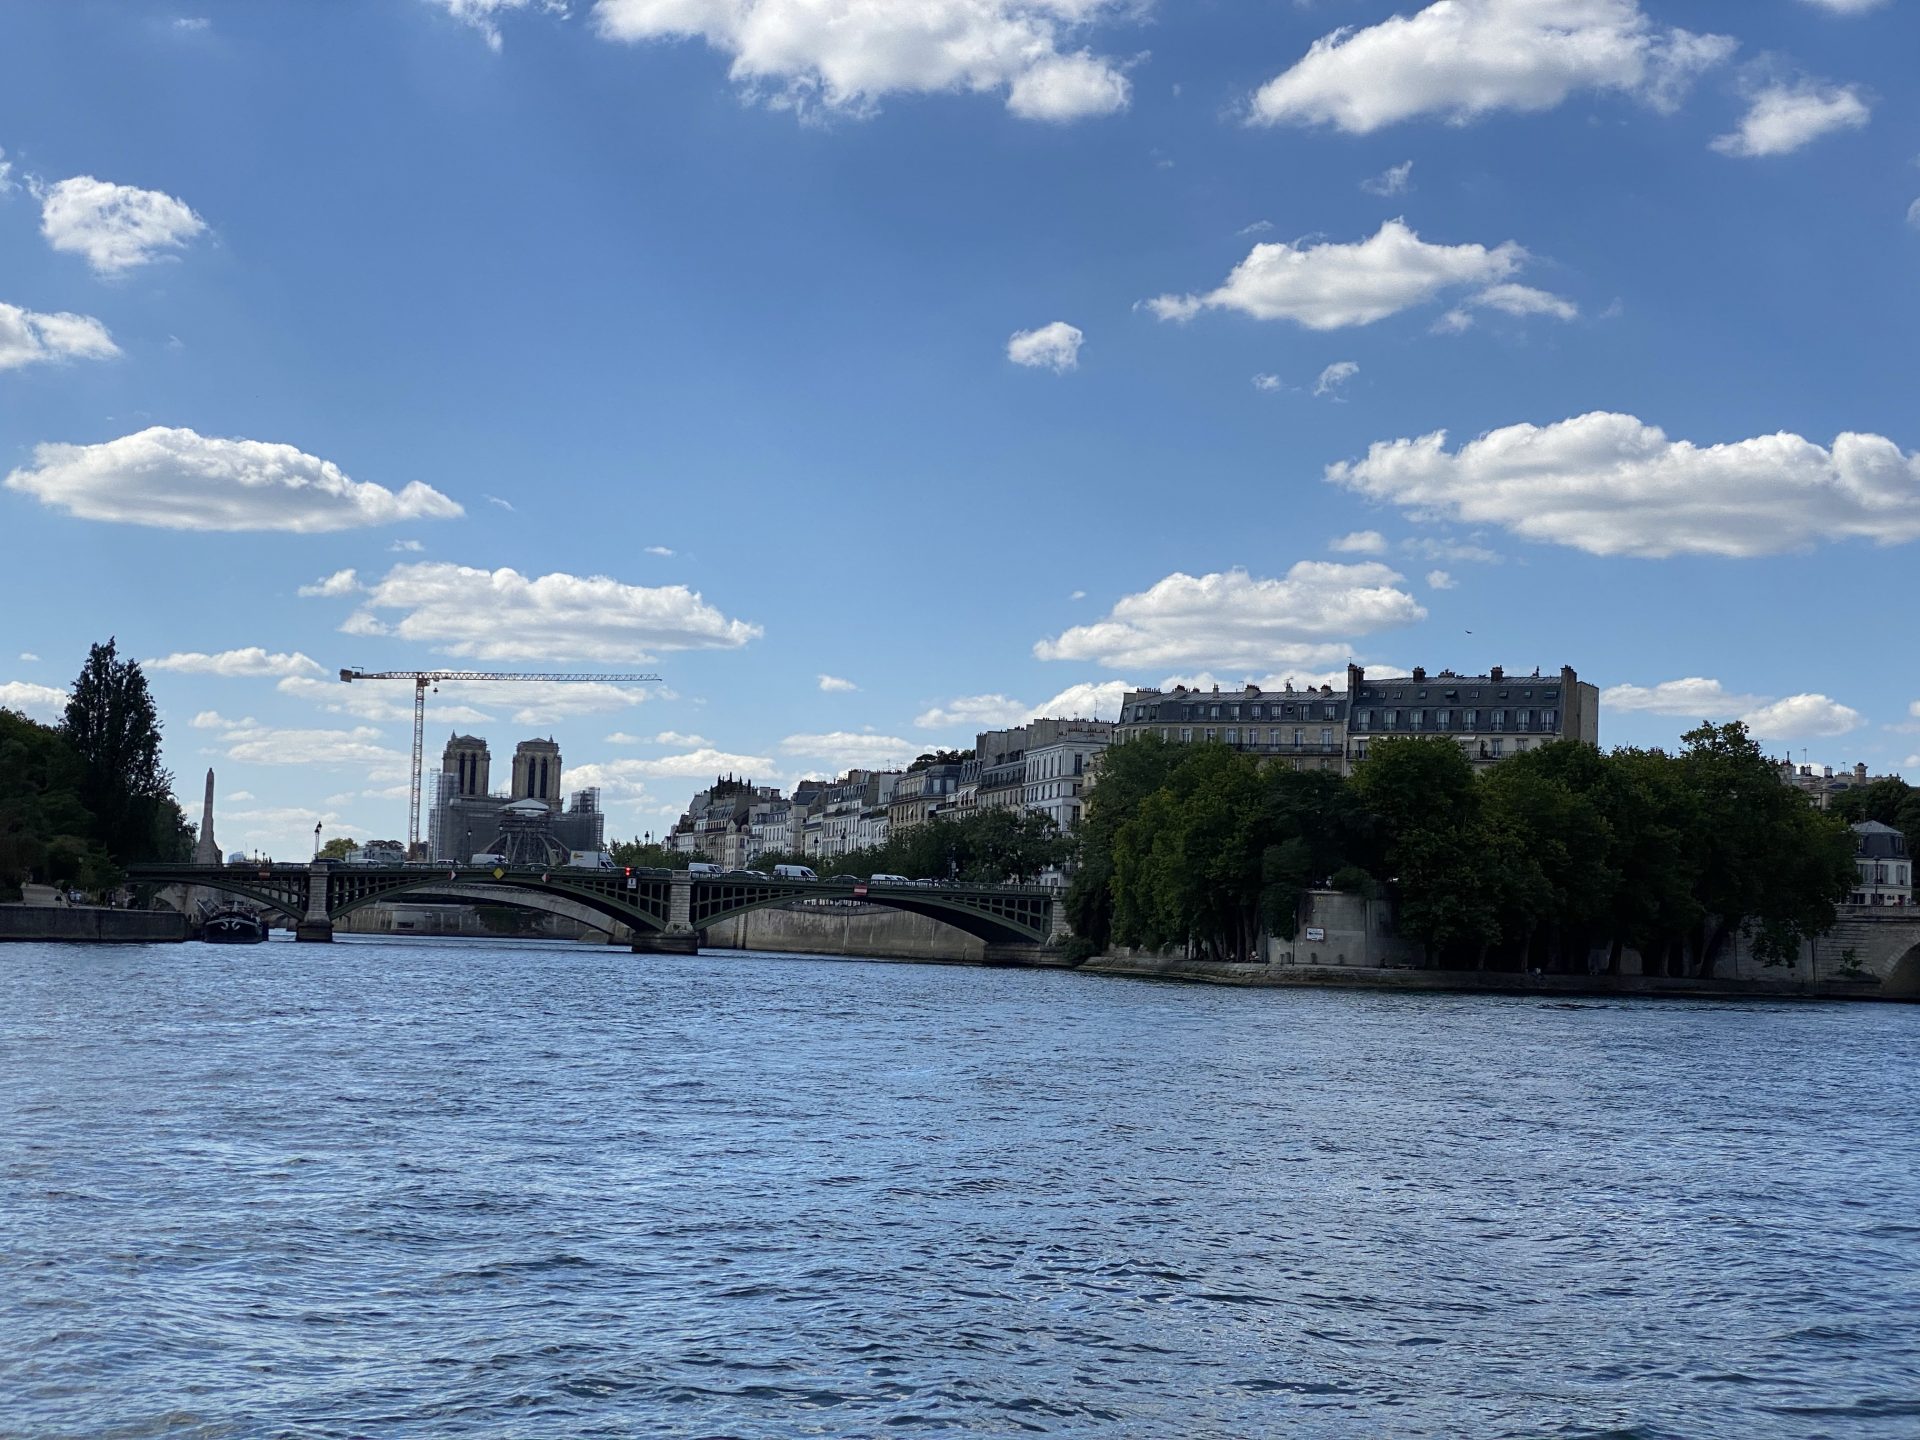 Notre-Dame under construction after entering Seine from Canal Saint-Martin